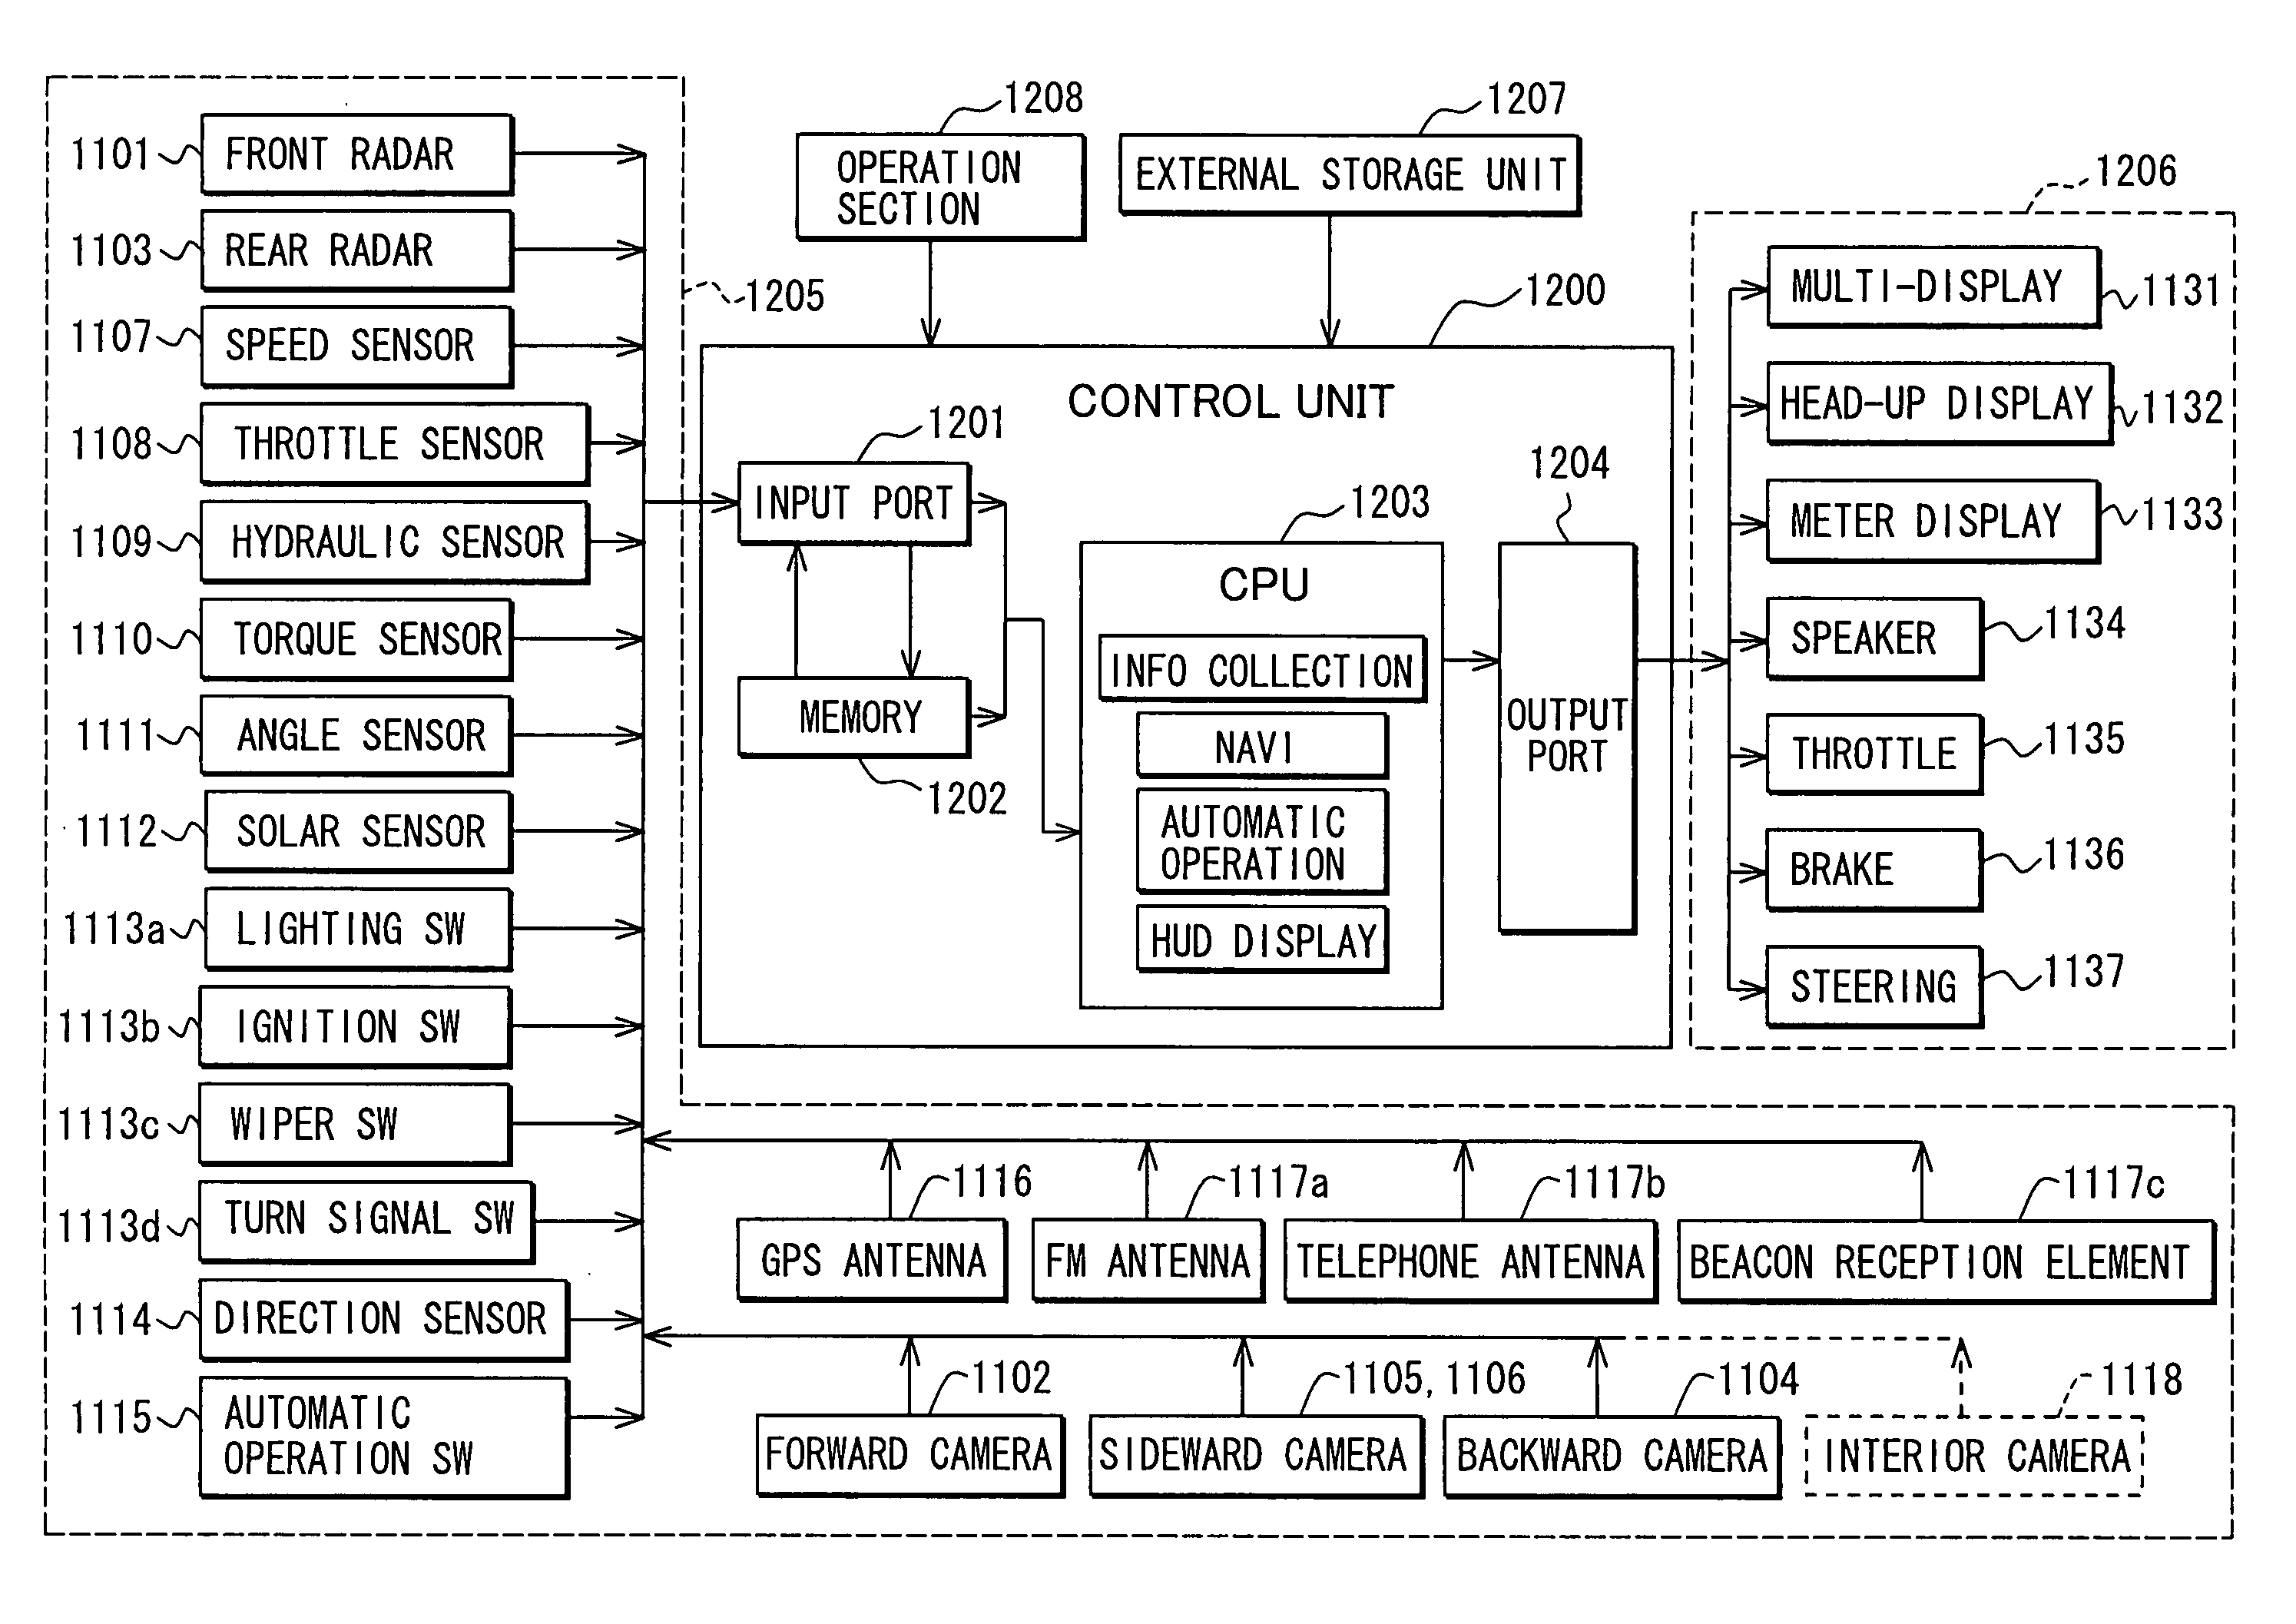 Vehicle information display system